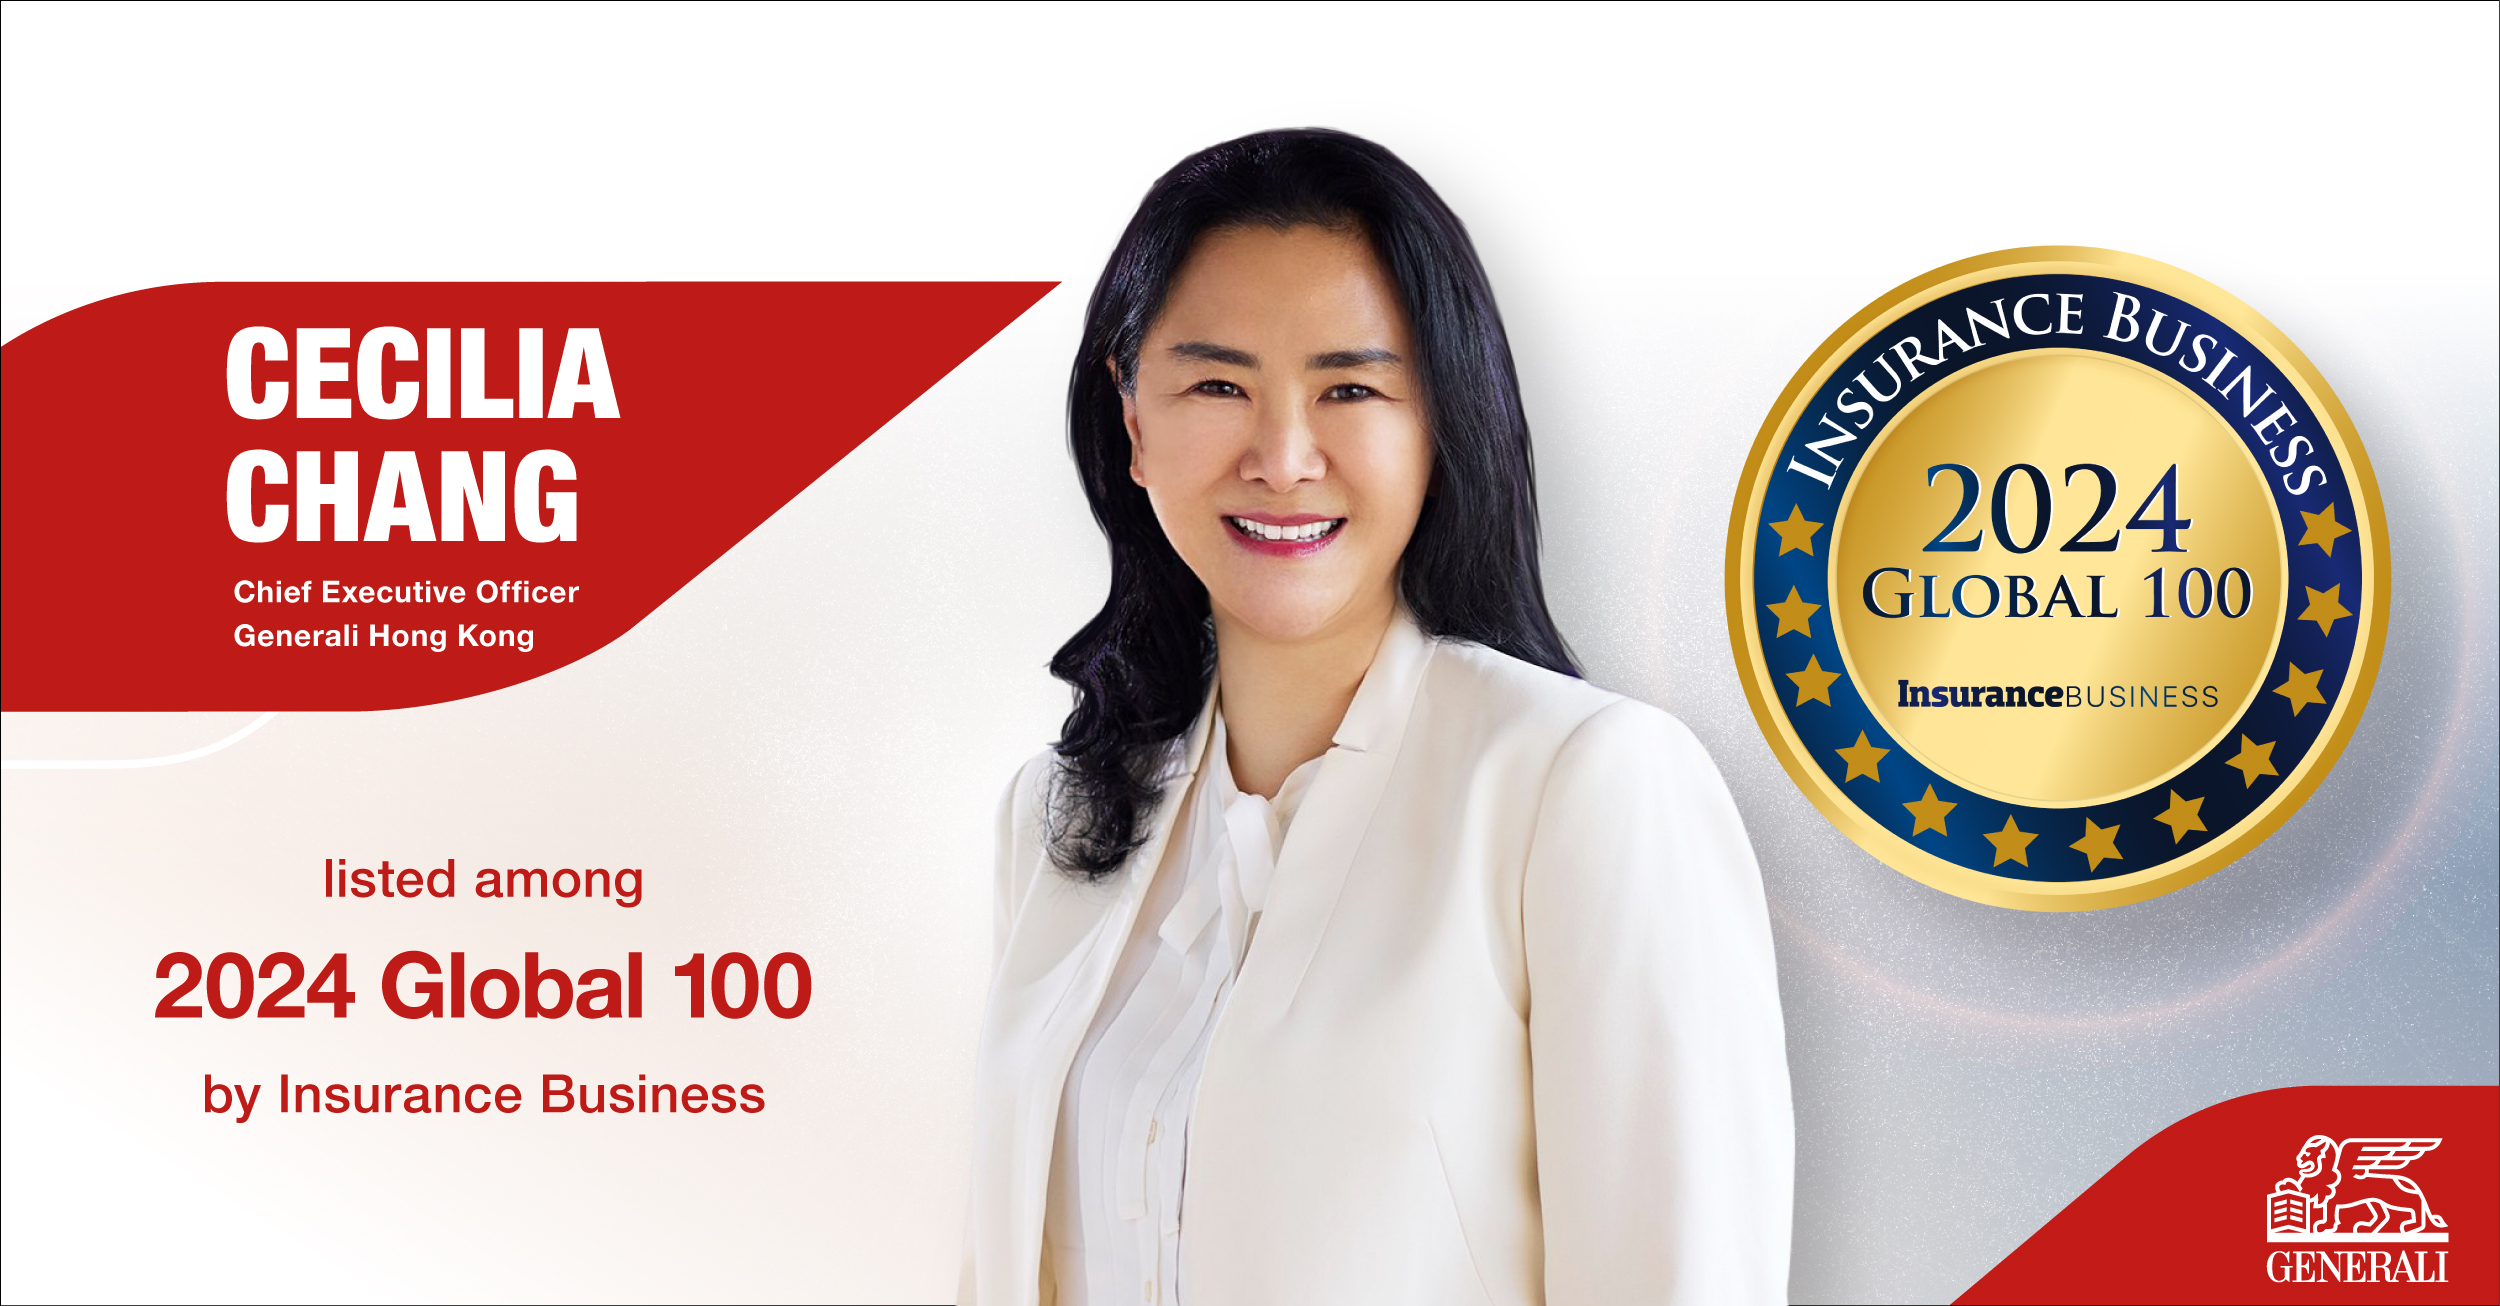 Ms. Cecilia Chang Earns Prestigious Recognition in the Insurance’s “Global 100” Award”.